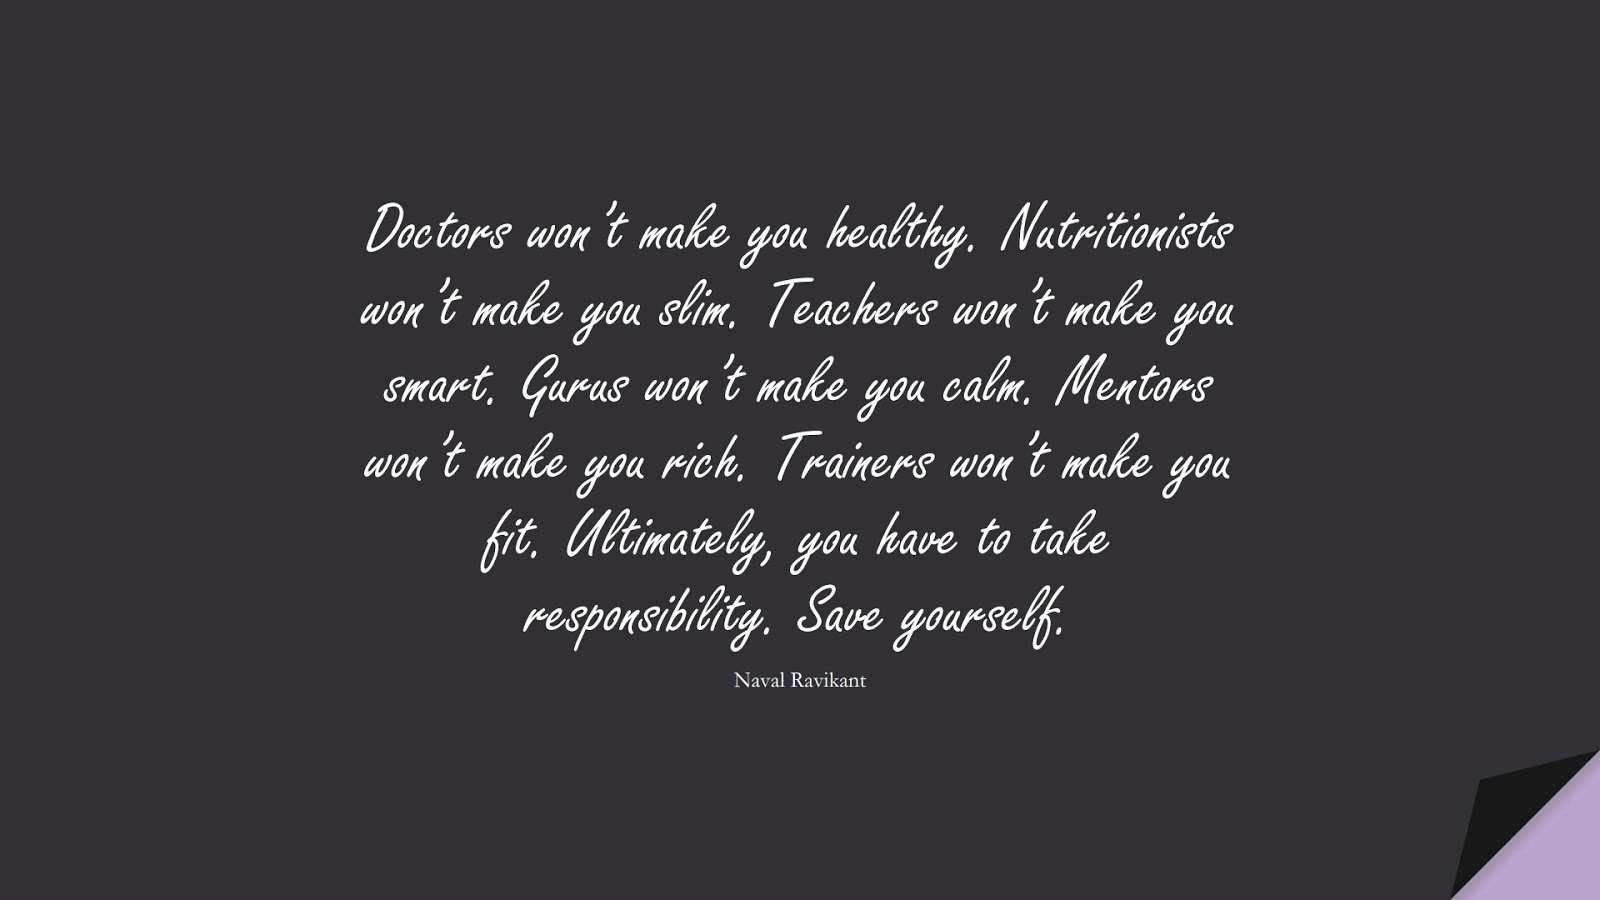 Doctors won’t make you healthy. Nutritionists won’t make you slim. Teachers won’t make you smart. Gurus won’t make you calm. Mentors won’t make you rich. Trainers won’t make you fit. Ultimately, you have to take responsibility. Save yourself. (Naval Ravikant);  #BestQuotes